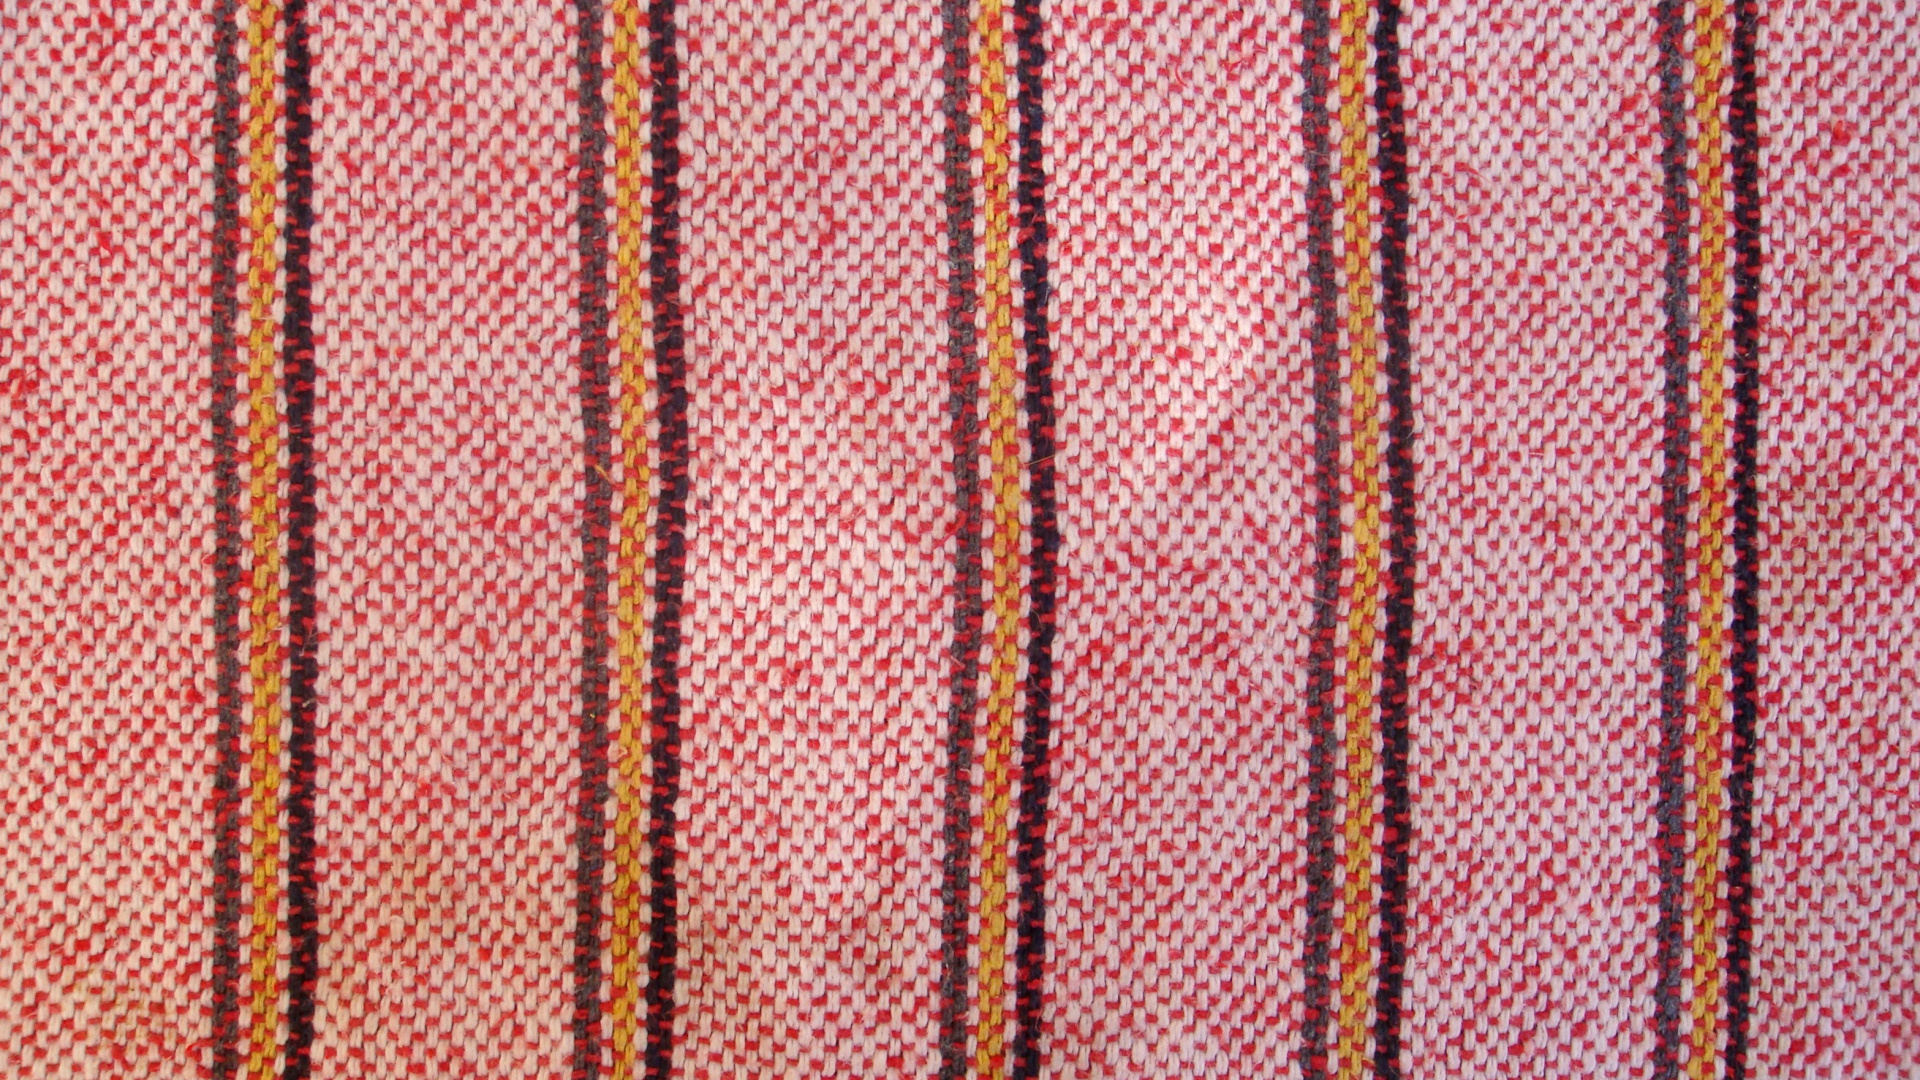 Wallpaper Red And Brown Striped Textile Full Hd Hdtv 1080p 169 Background Download Free 6916